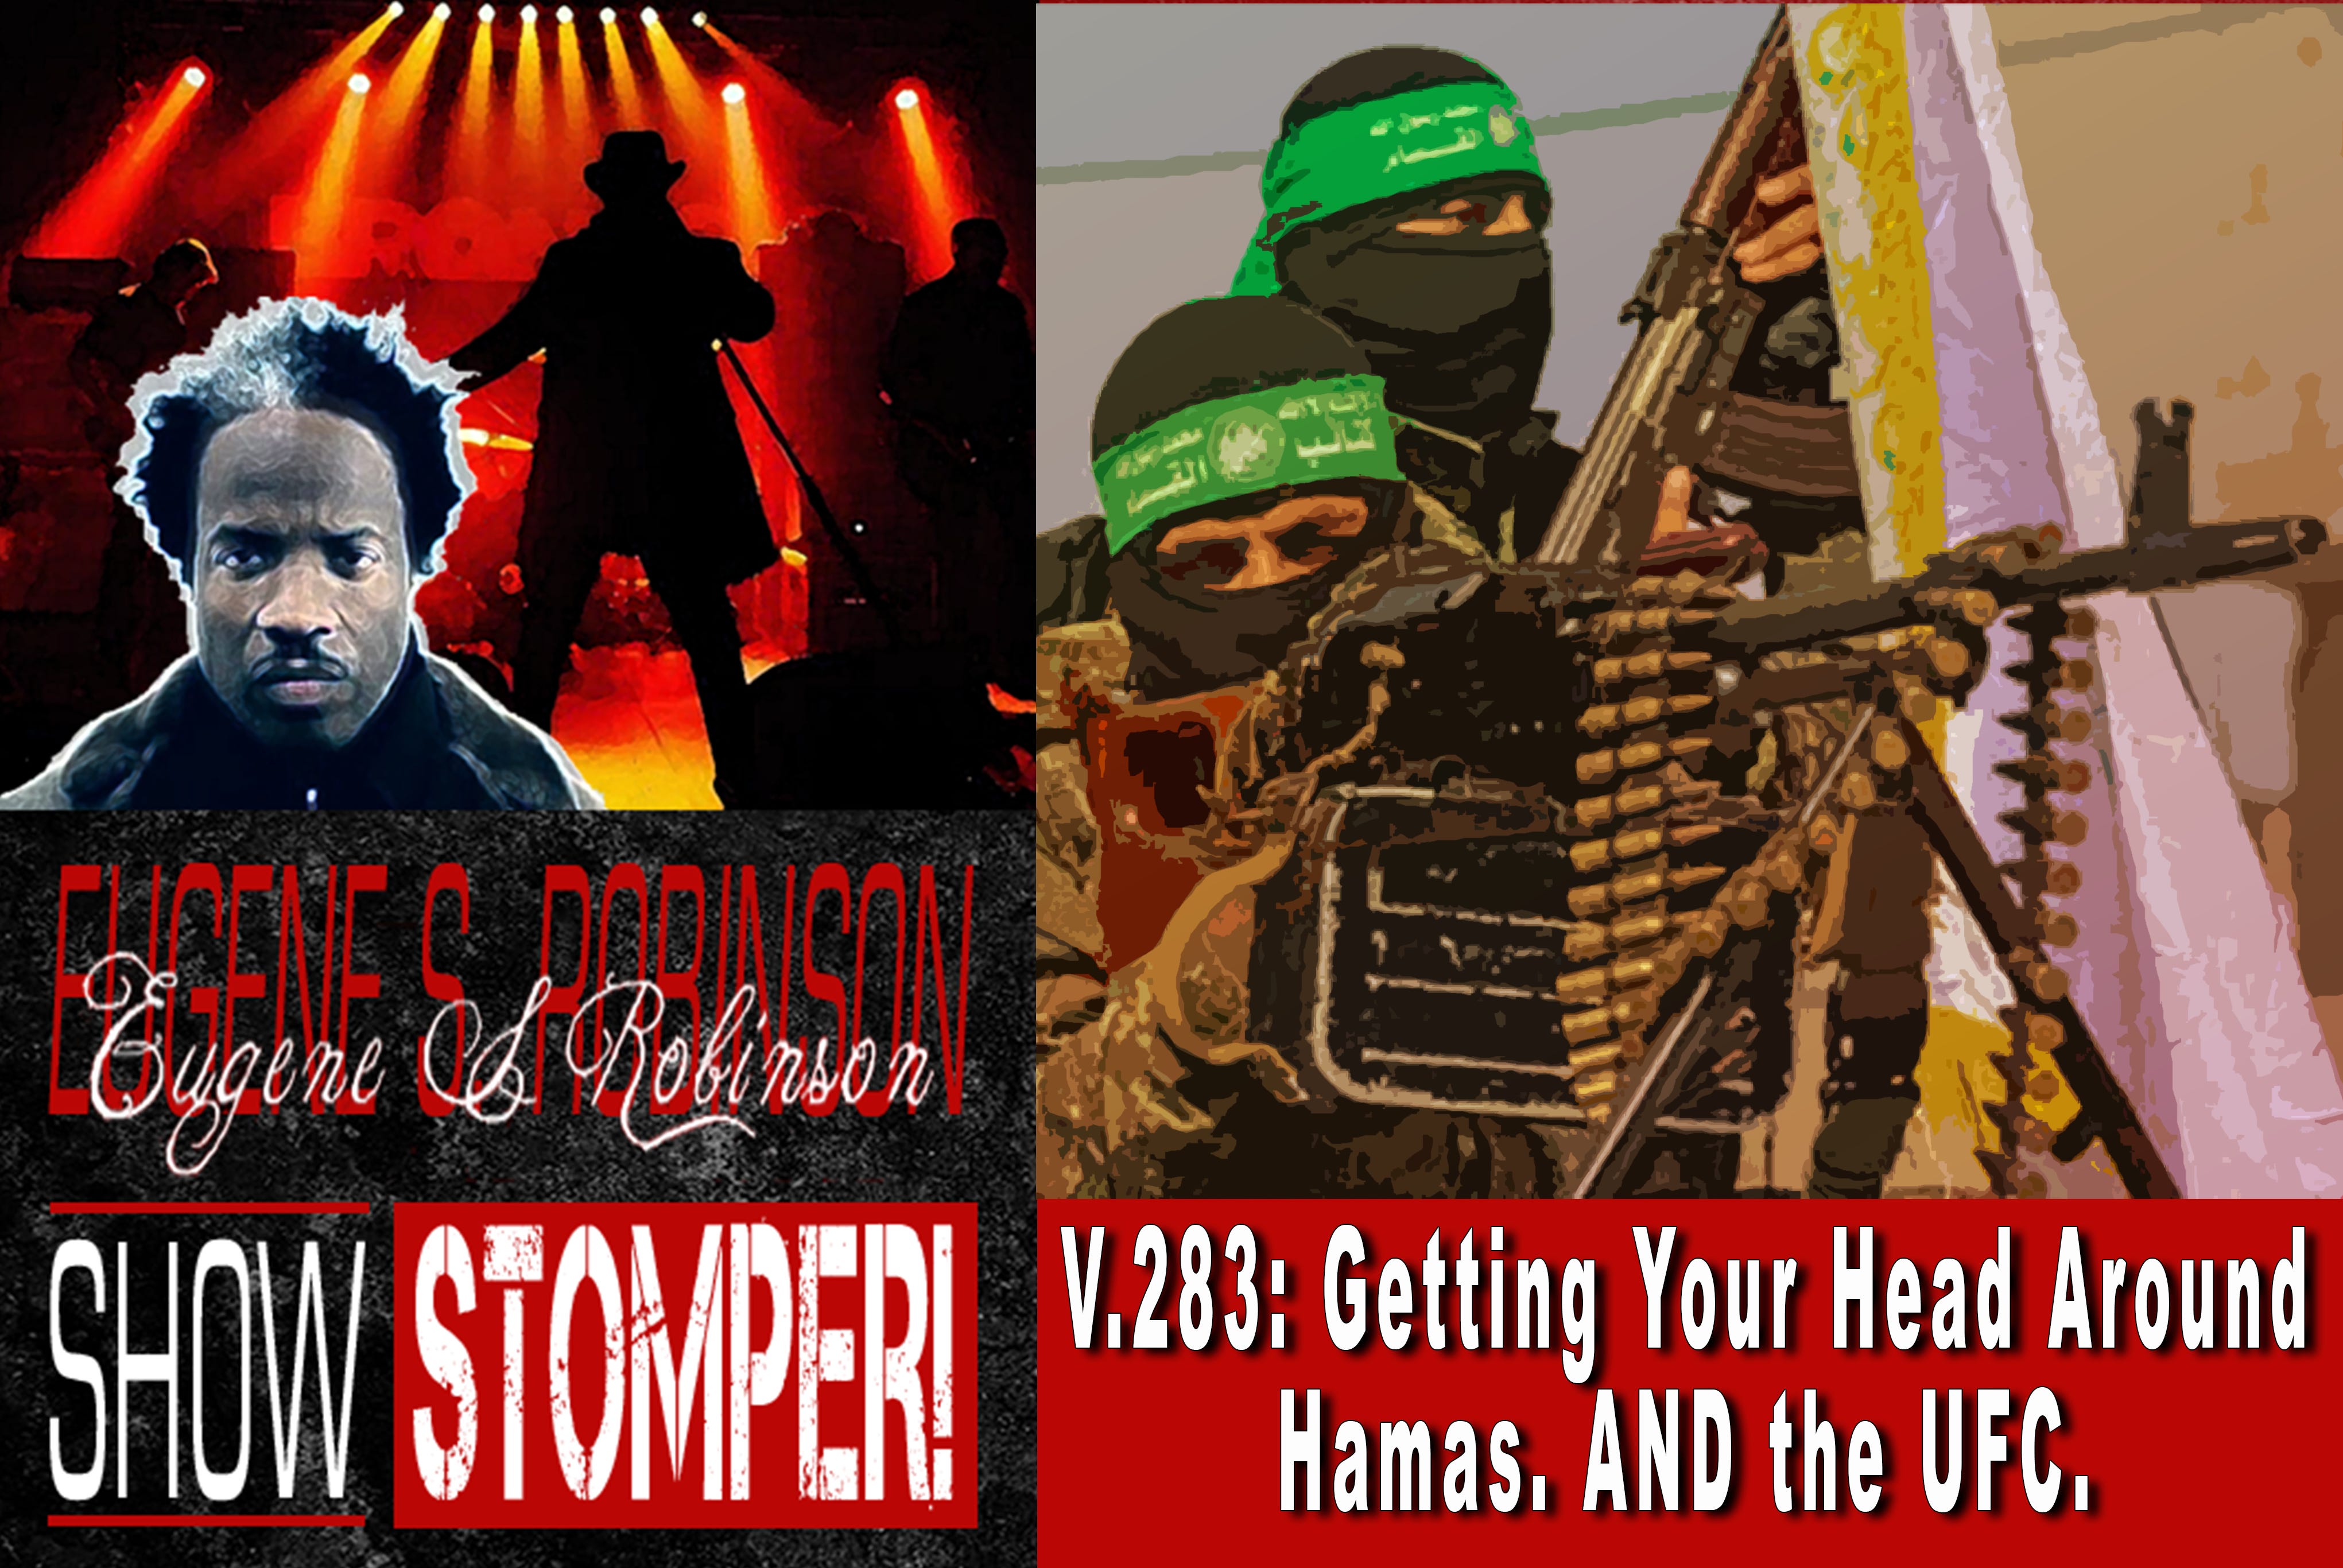 V.283: Getting Your Head Around Hamas. AND the UFC. All On The Eugene S. Robinson Show Stomper!